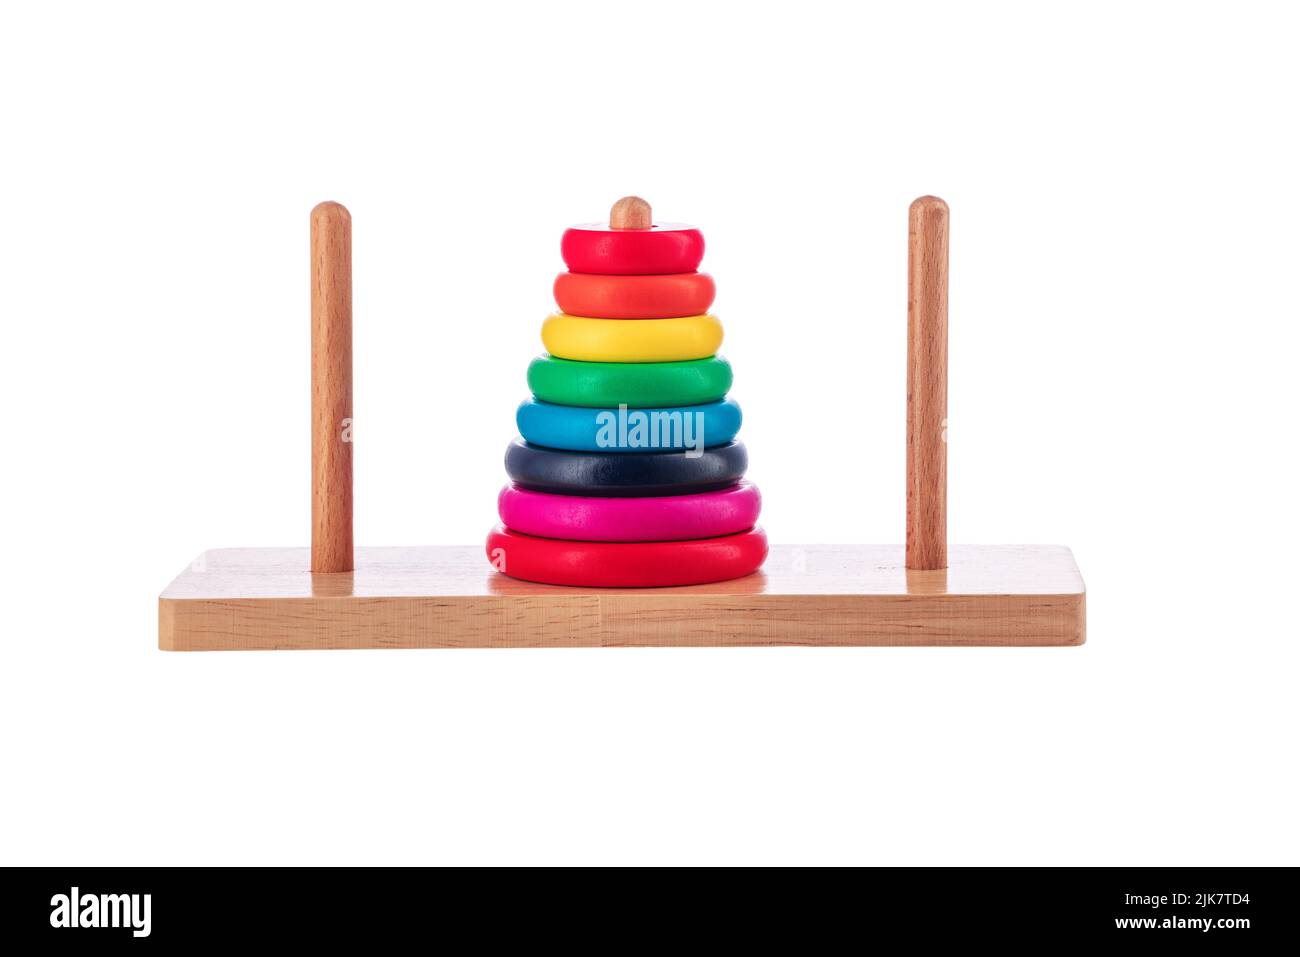 Wooden puzzle tower of hanoi with color rings isolated on white background. Toy for kids. Stock Photo